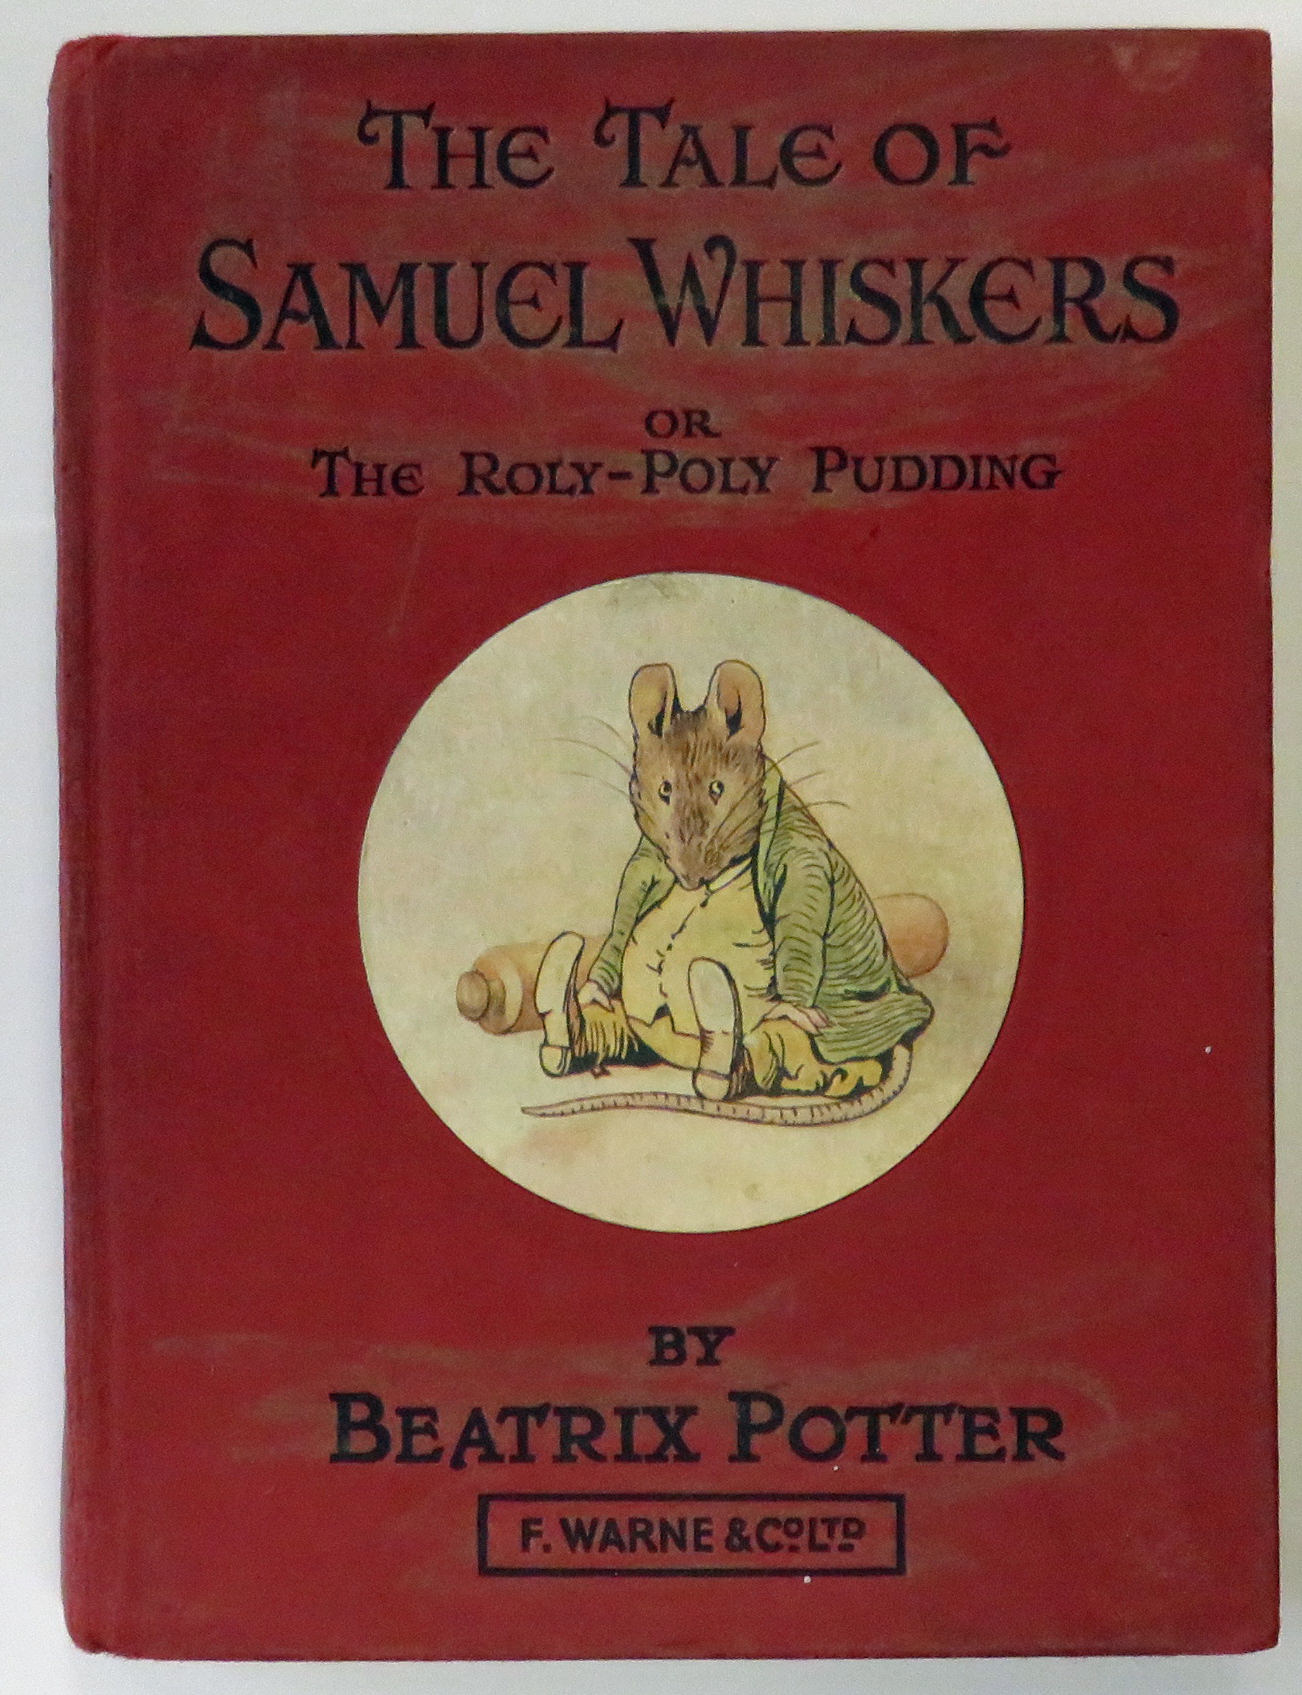 The Tale Of Samuel Whiskers or The Roly-Poly Pudding 